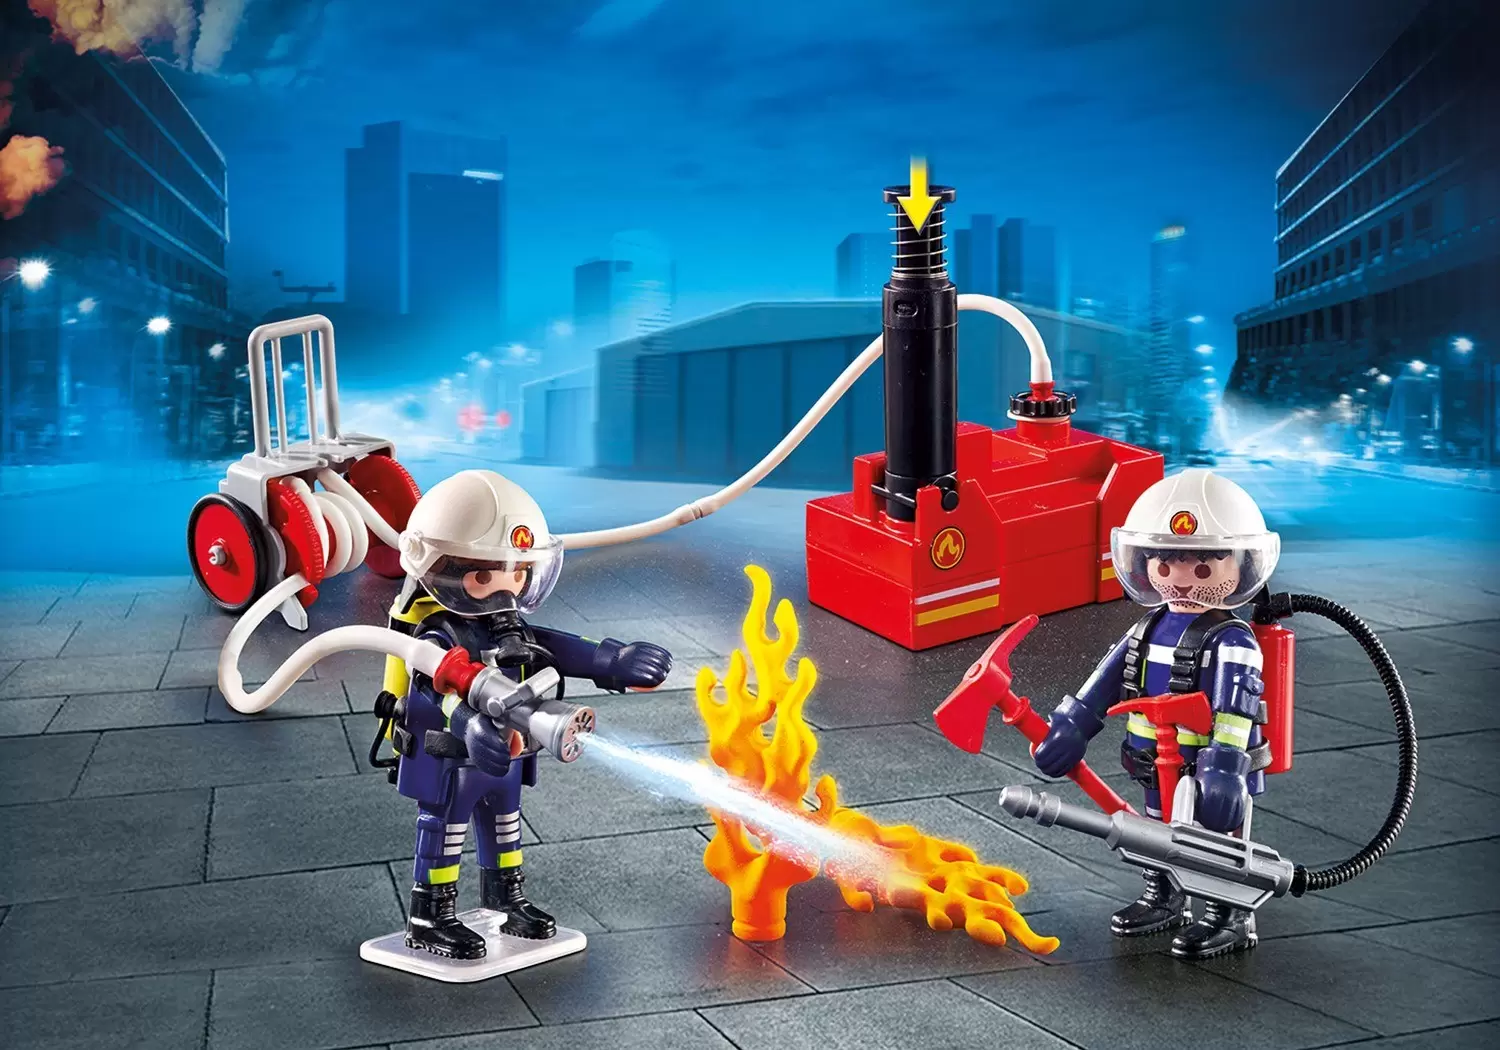 Playmobil Firemen - Fire Fighters with Pump